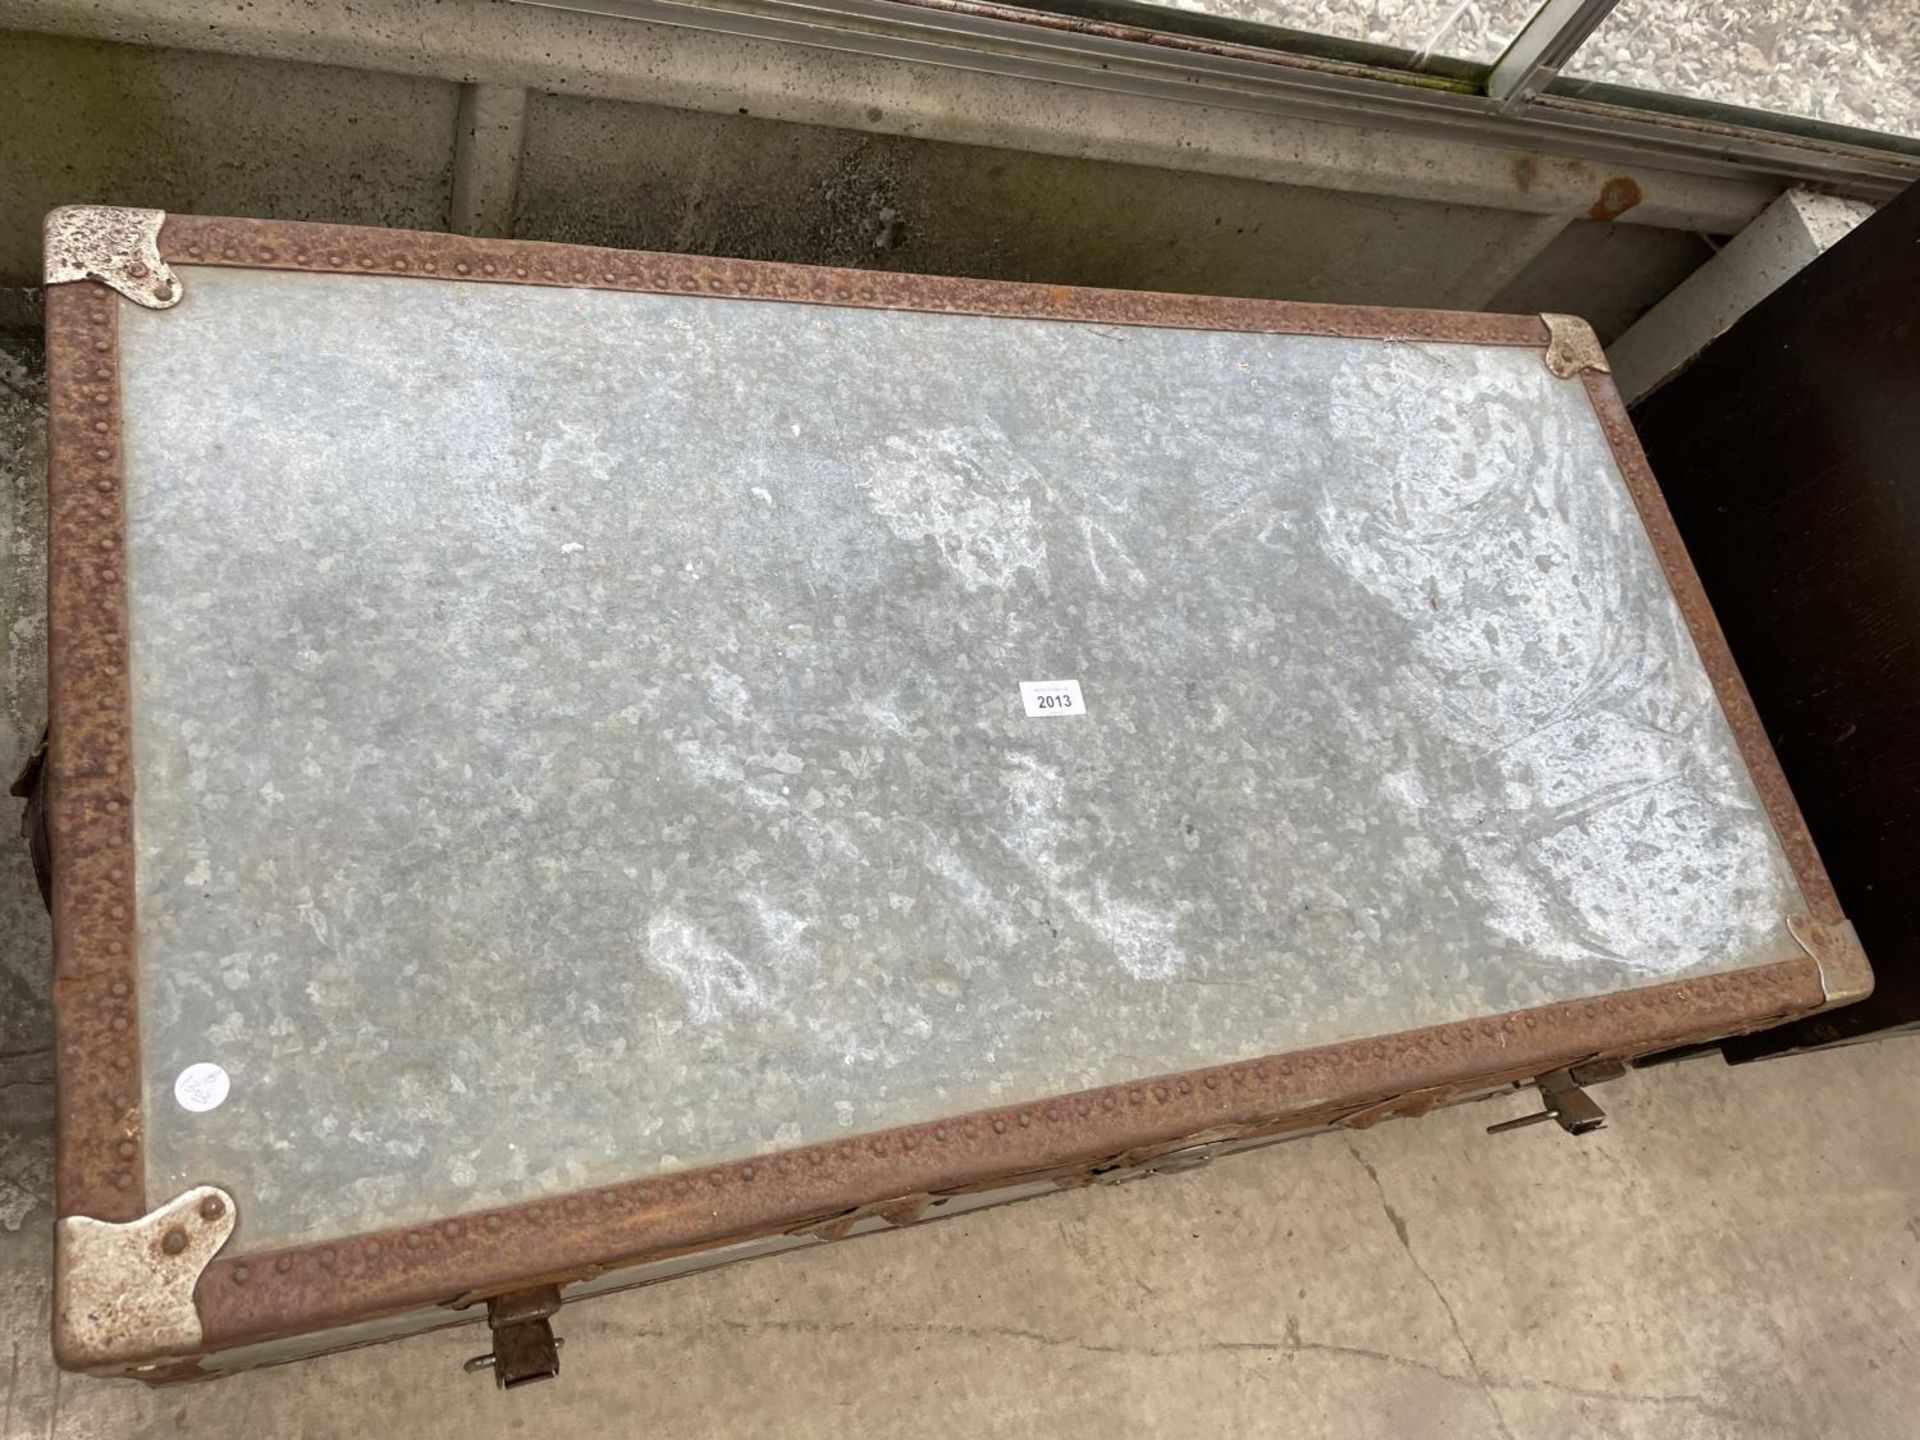 A SUBSTANTIAL GALVANISED METAL TRAVELLING TRUNK, 40X21" - Image 2 of 4